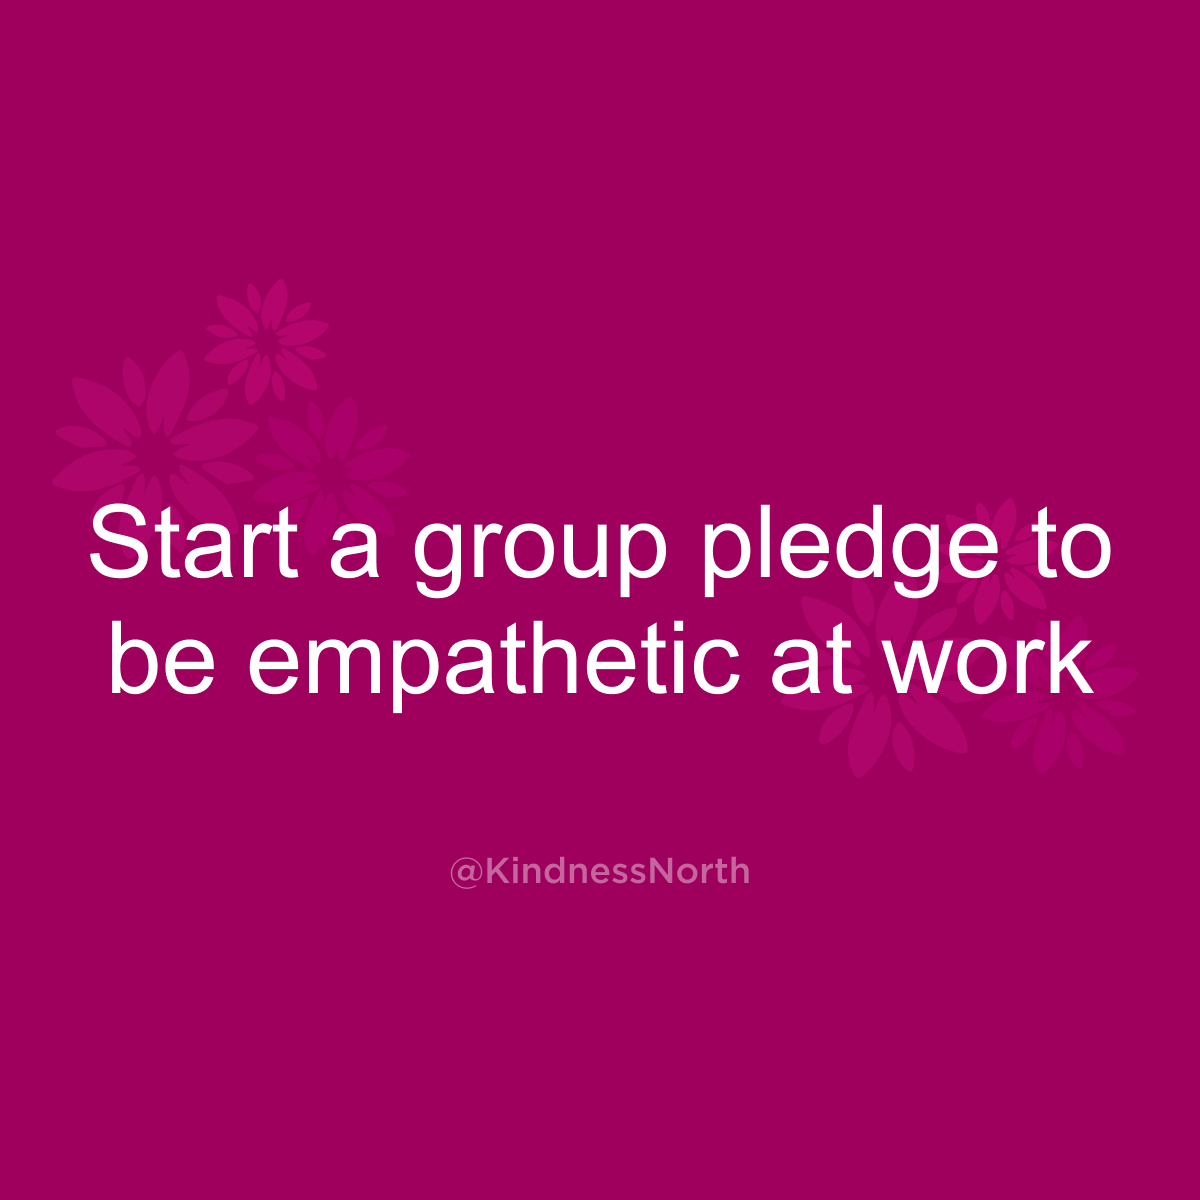 Start a group pledge to be empathetic at work